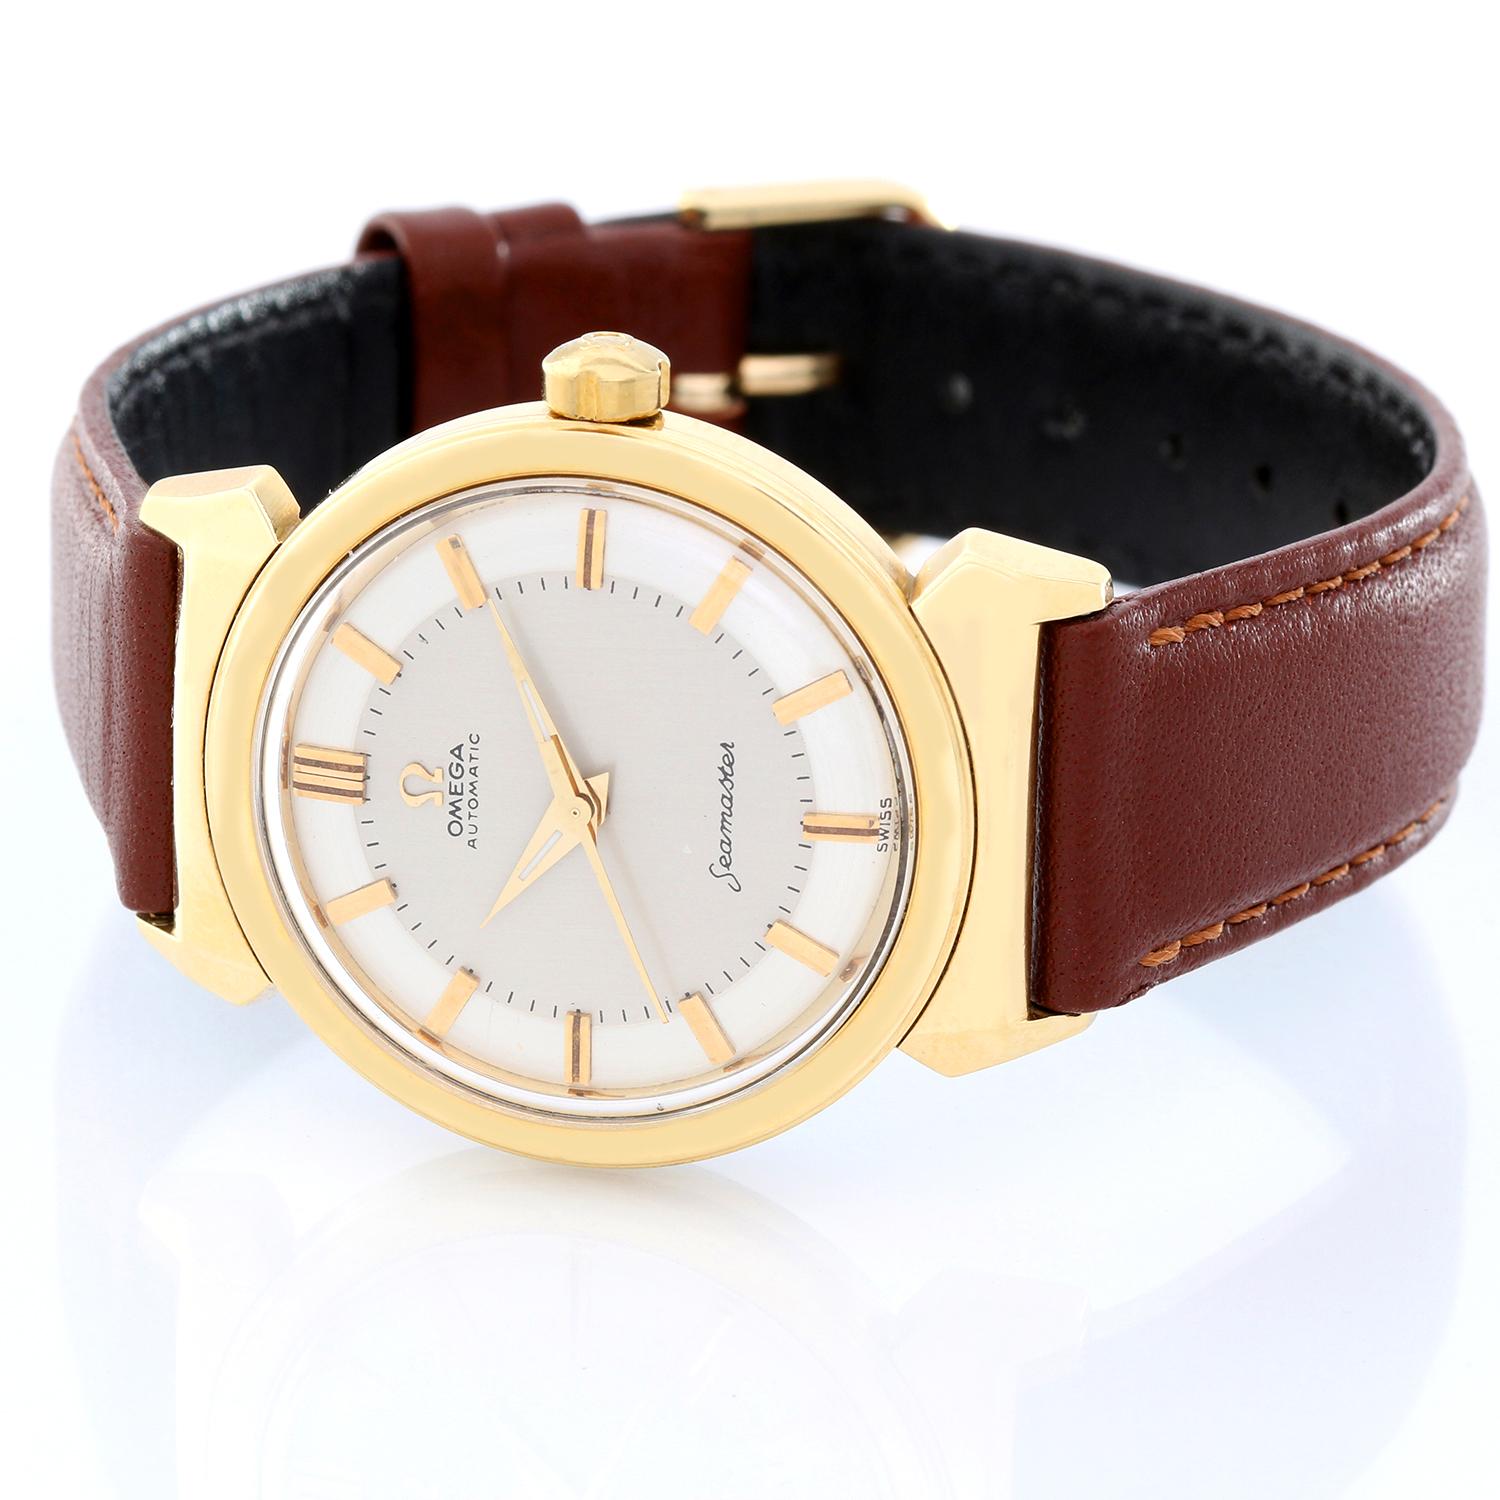 Omega Automatic Seamaster Men's Watch  - Automatic winding. Gold filled ( 32 mm ). Silvered dial with Yellow gold baton indexes. Brown leather strap band. Pre-owned with custom box. 